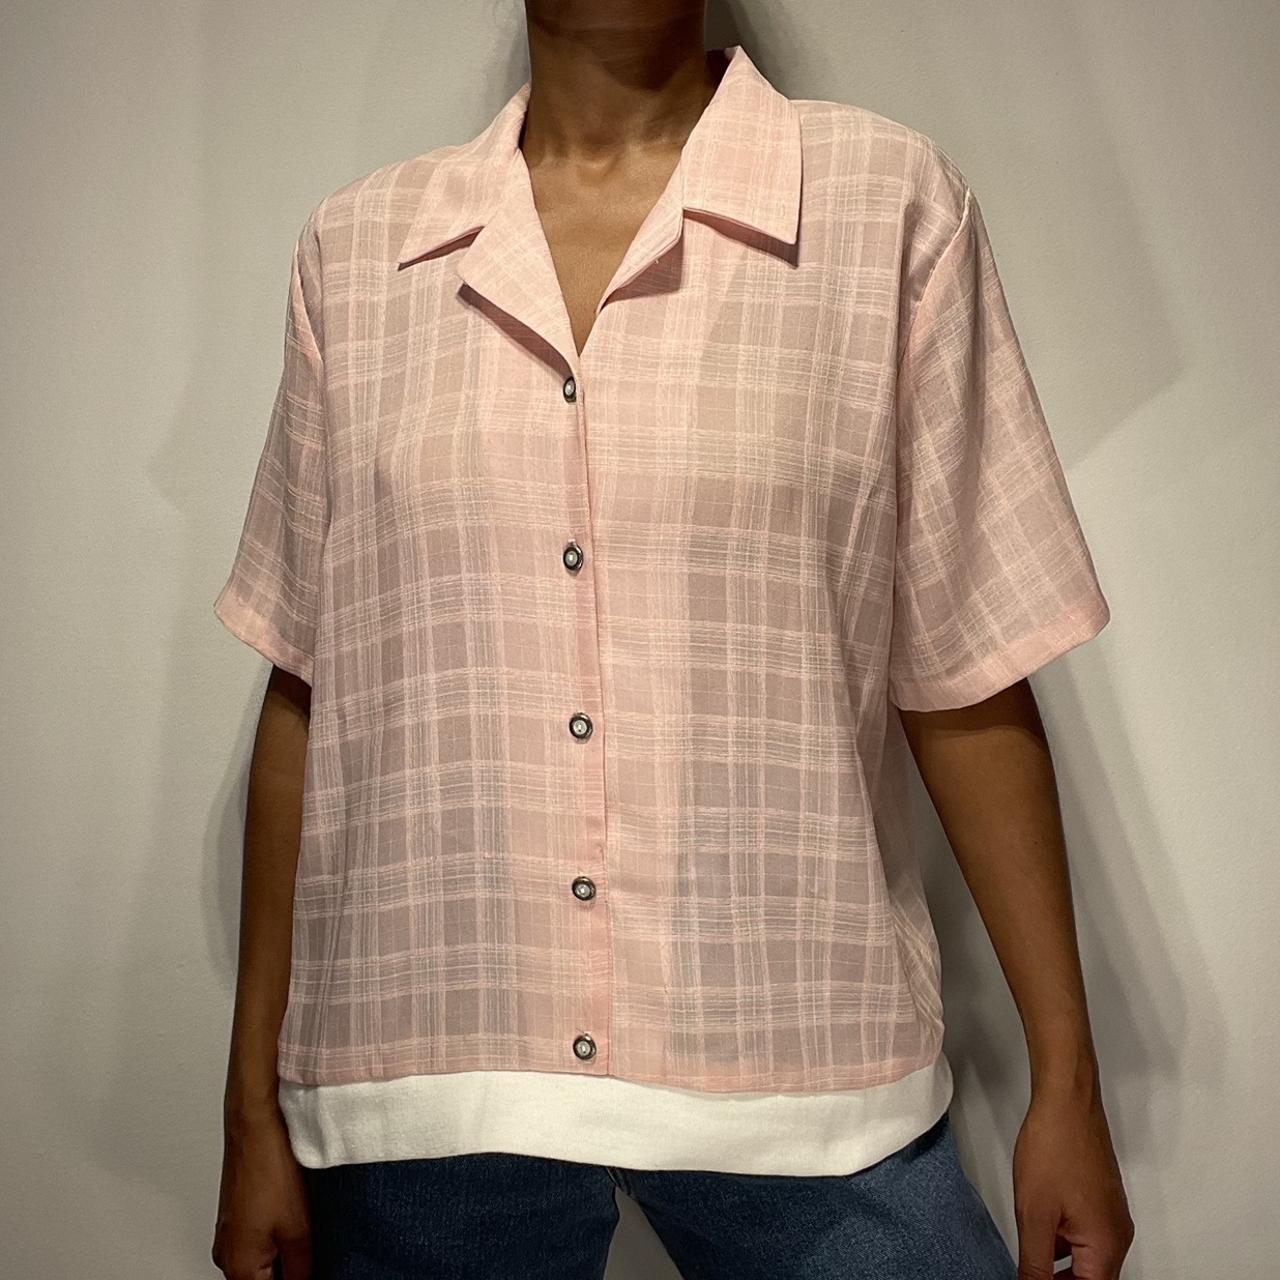 American Vintage Women's Pink and White Blouse (3)